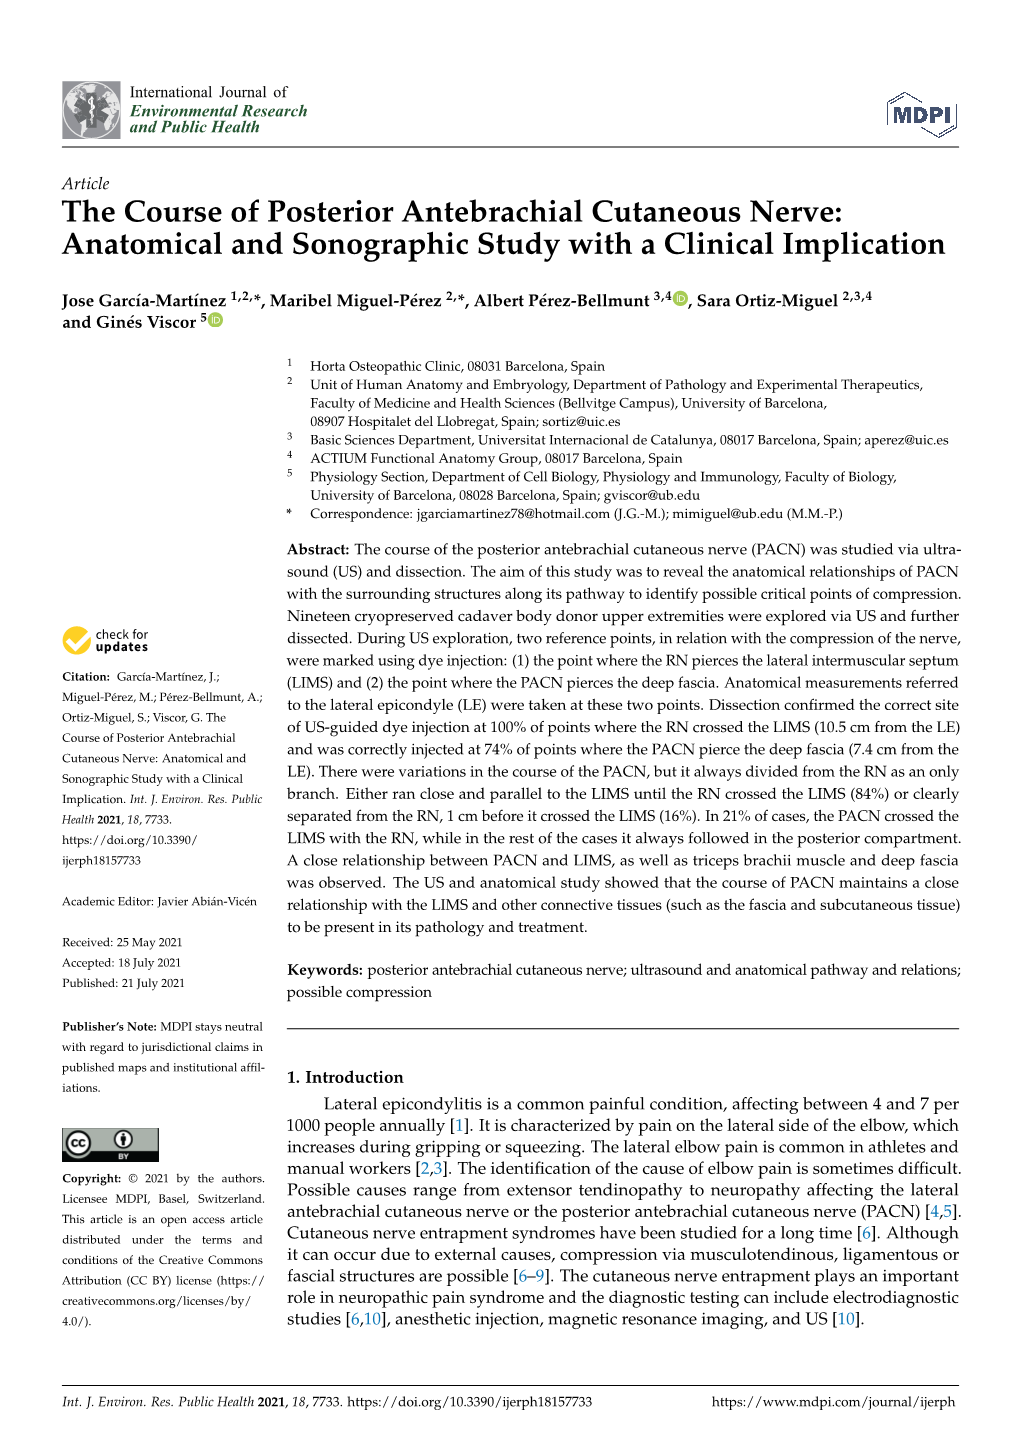 The Course of Posterior Antebrachial Cutaneous Nerve: Anatomical and Sonographic Study with a Clinical Implication